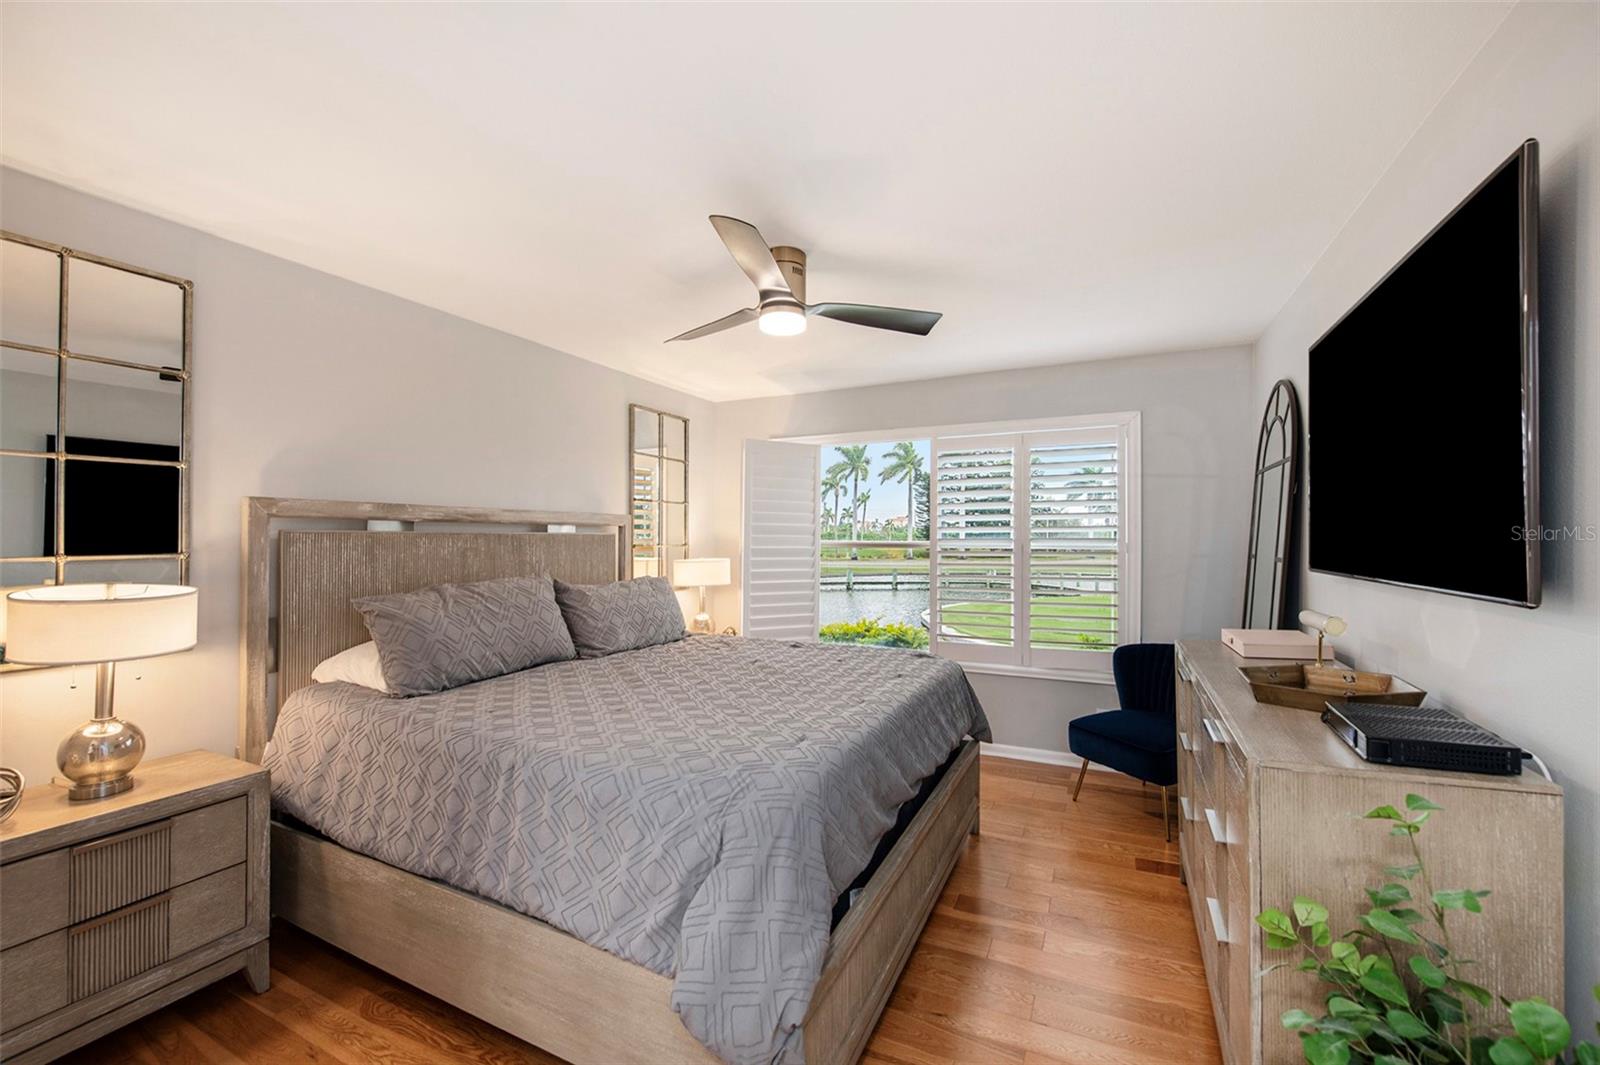 Master bedroom with large windows and shutters that can open up fully for the perfect view